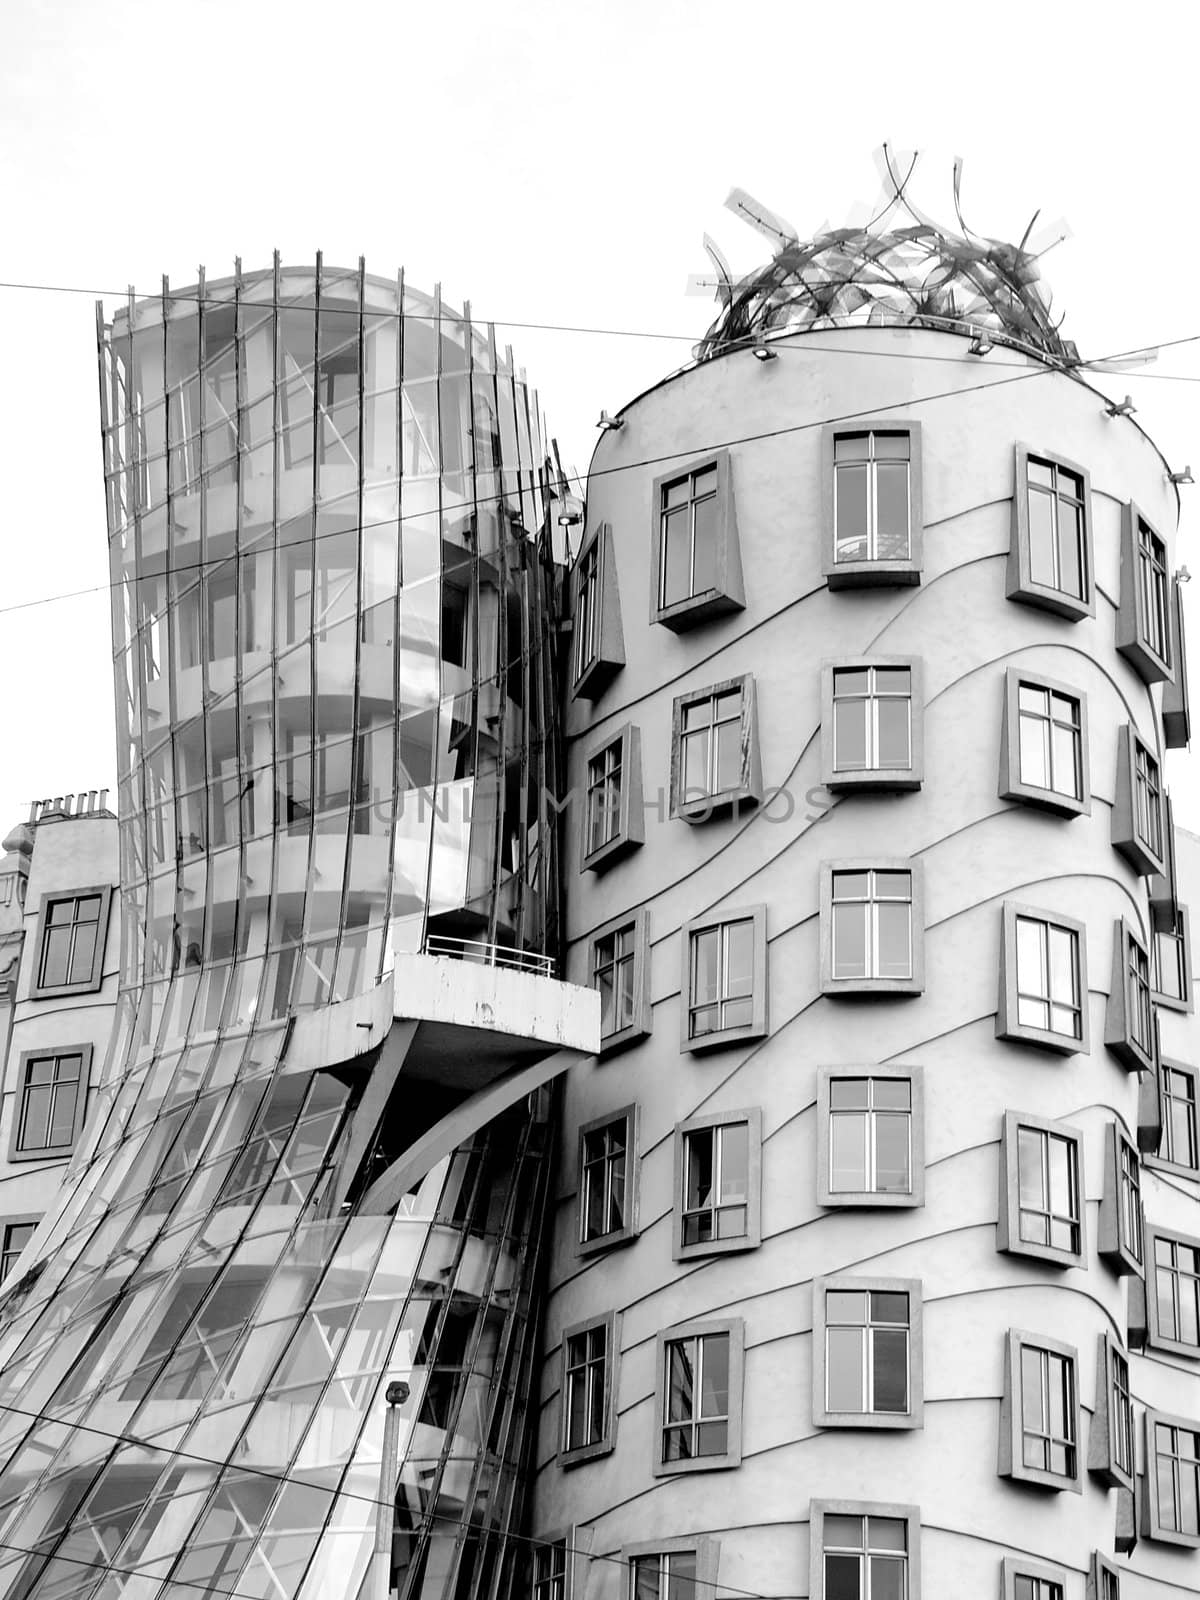 The dancing house in Prague by anderm